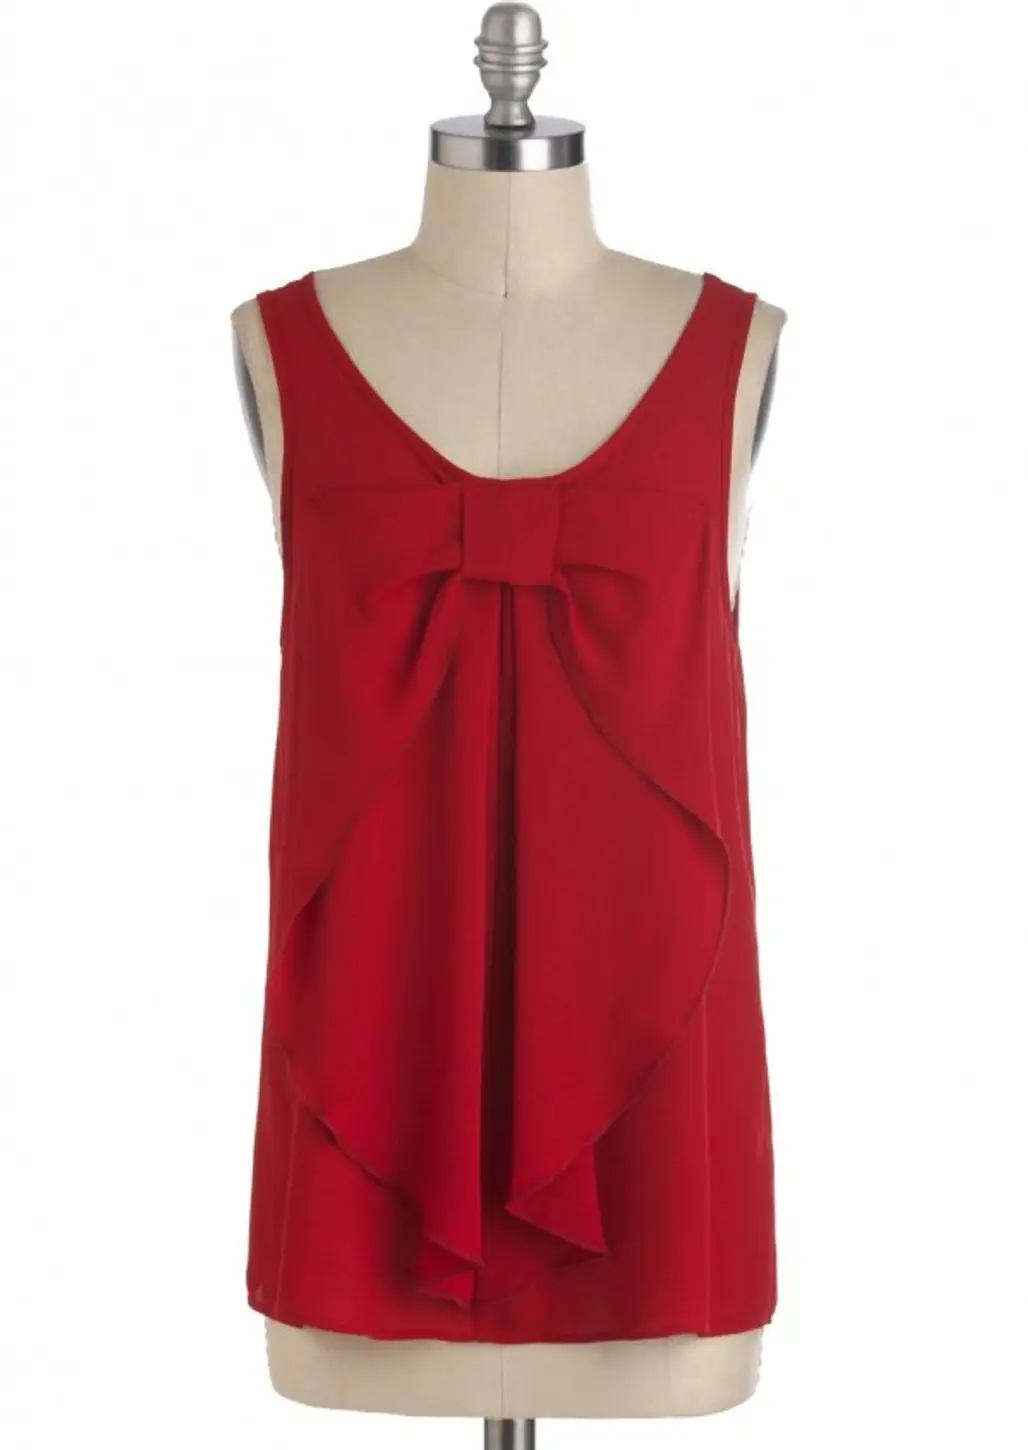 Modcloth – Hello, Bow! Top in Red